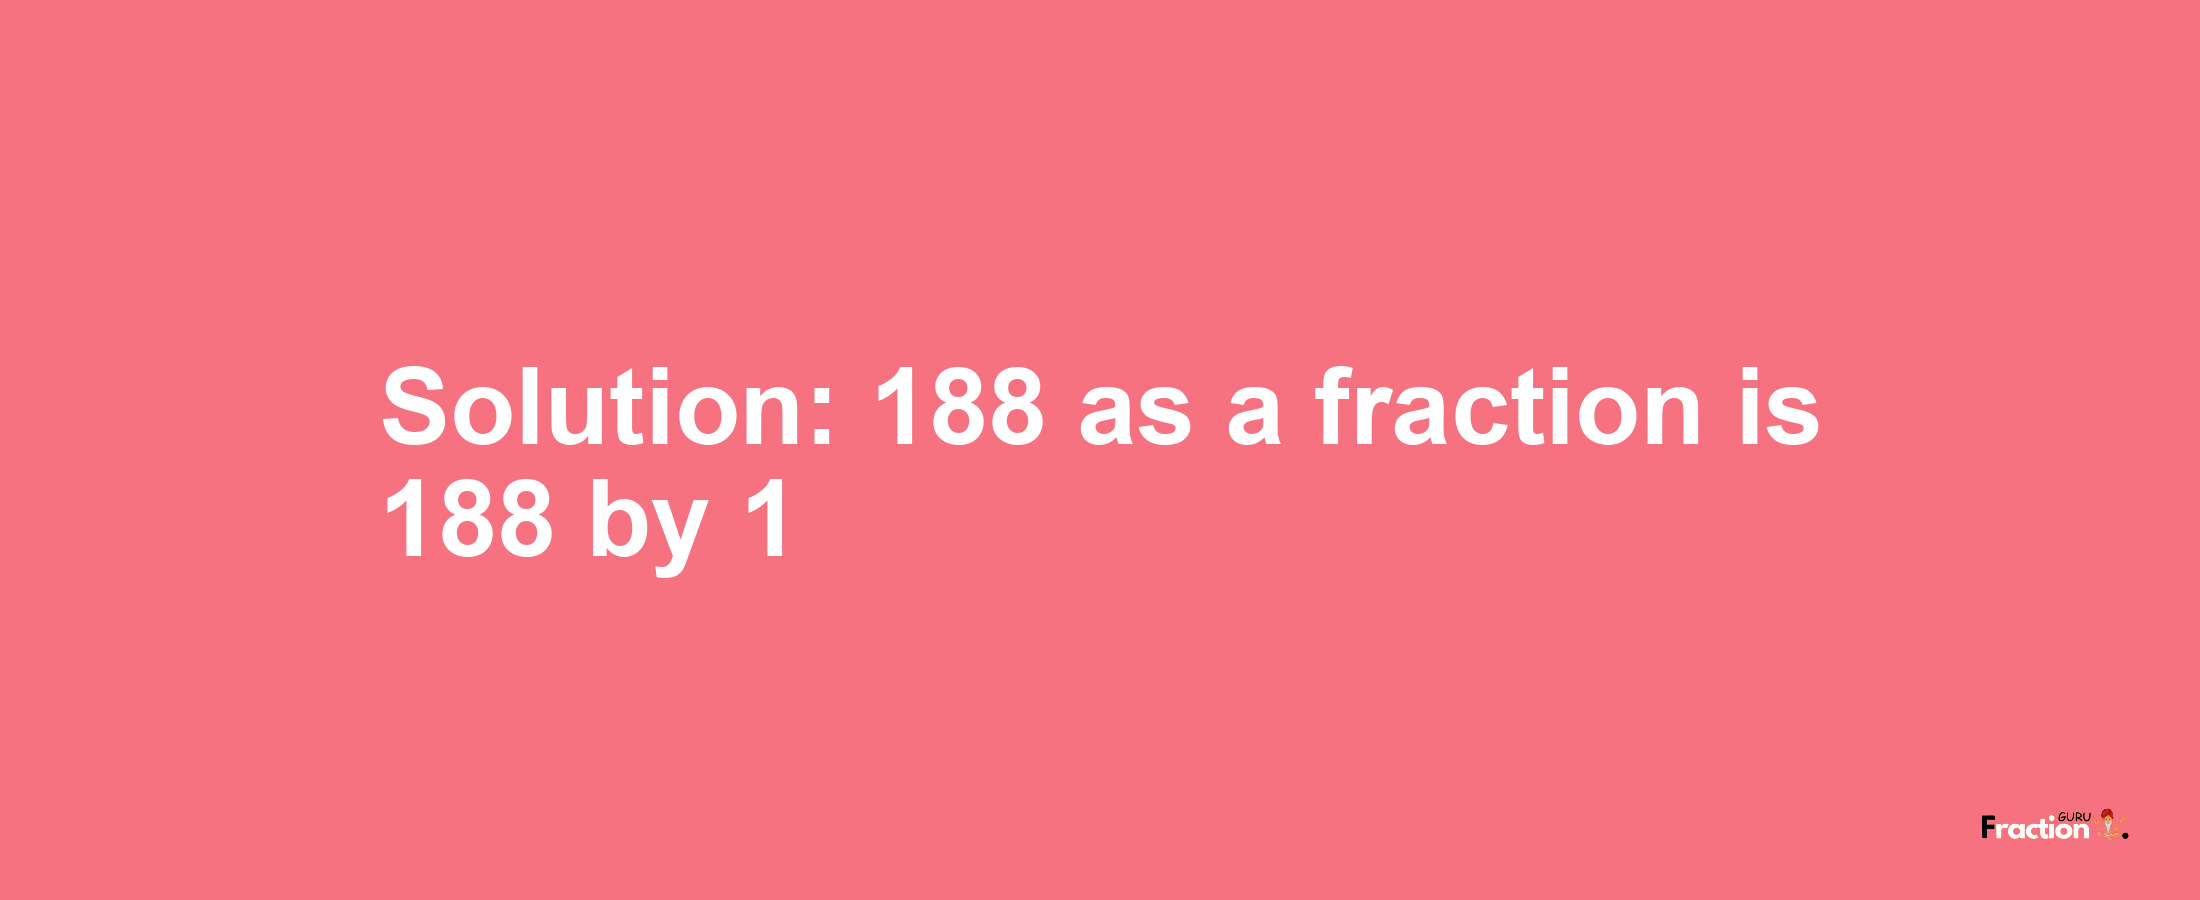 Solution:188 as a fraction is 188/1